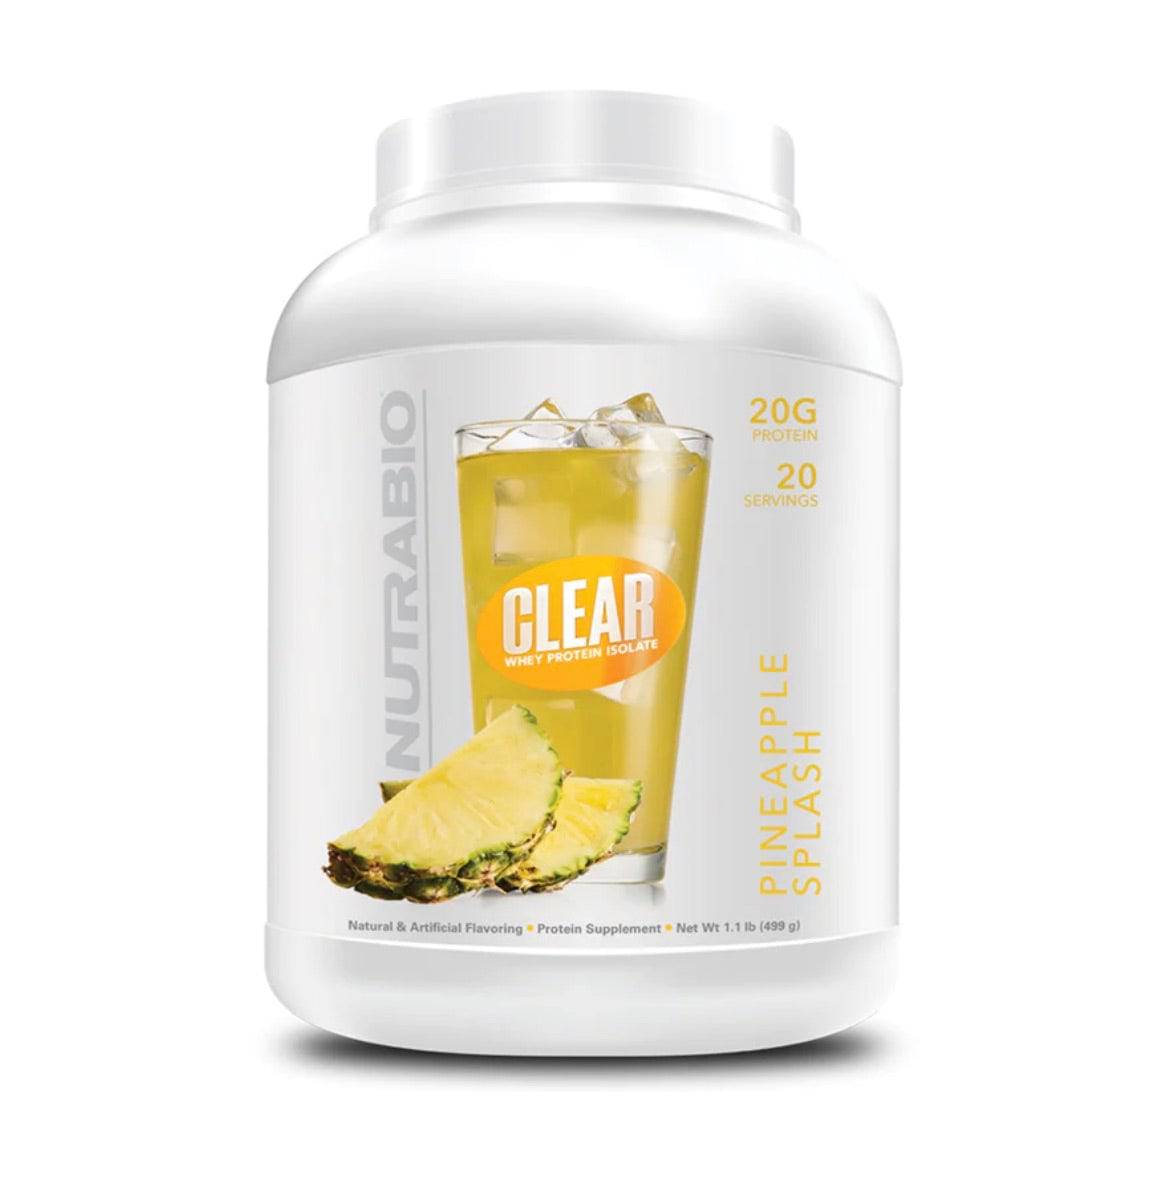 Clear Whey Protein Isolate - Nutrabio - Prime Sports Nutrition